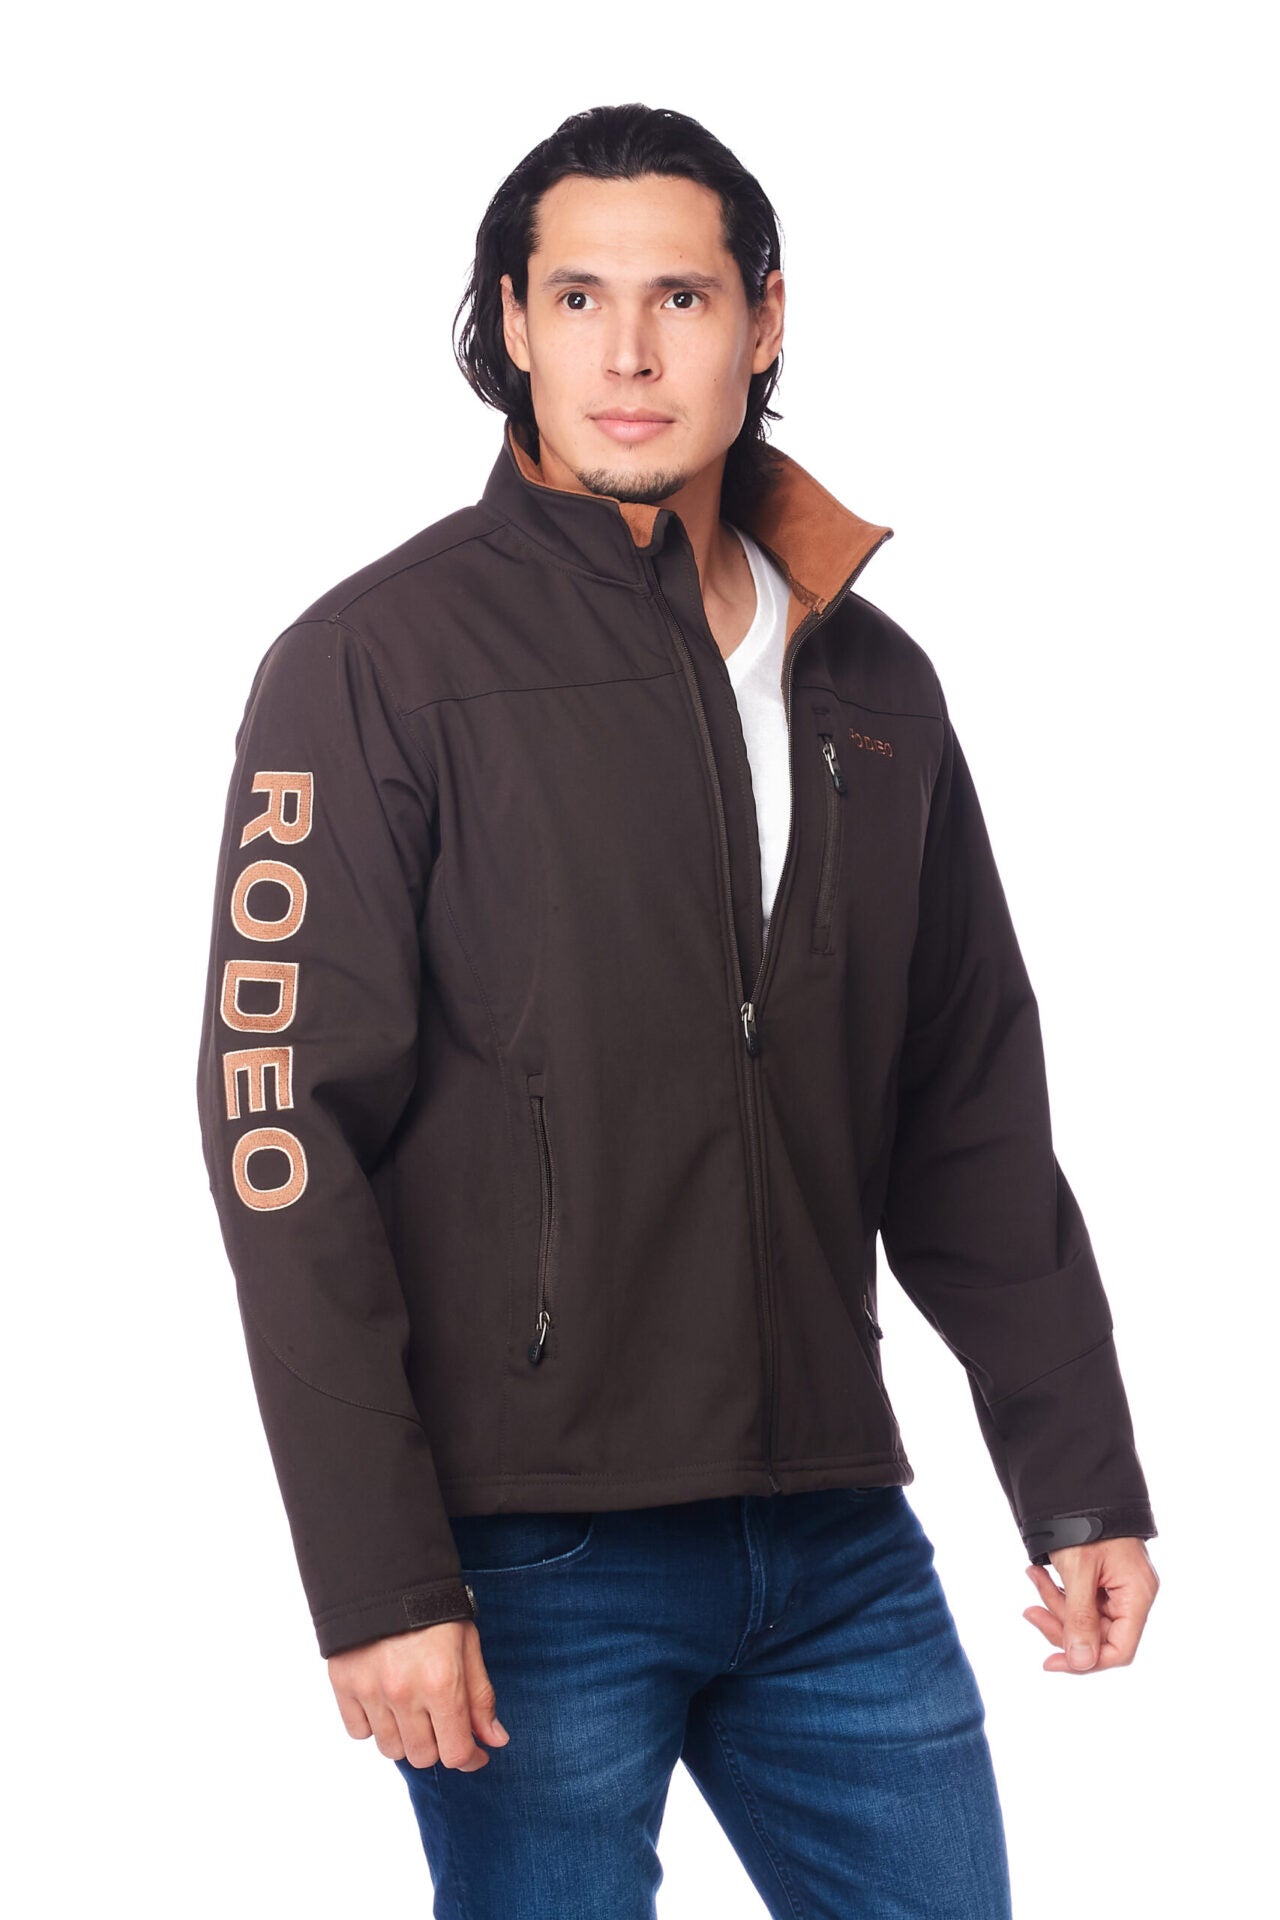  Men's High-Quality Soft Shell Bonded Jacket With Contrast Fleeceand Rodeo Embroidery-BROWN-COGNAC